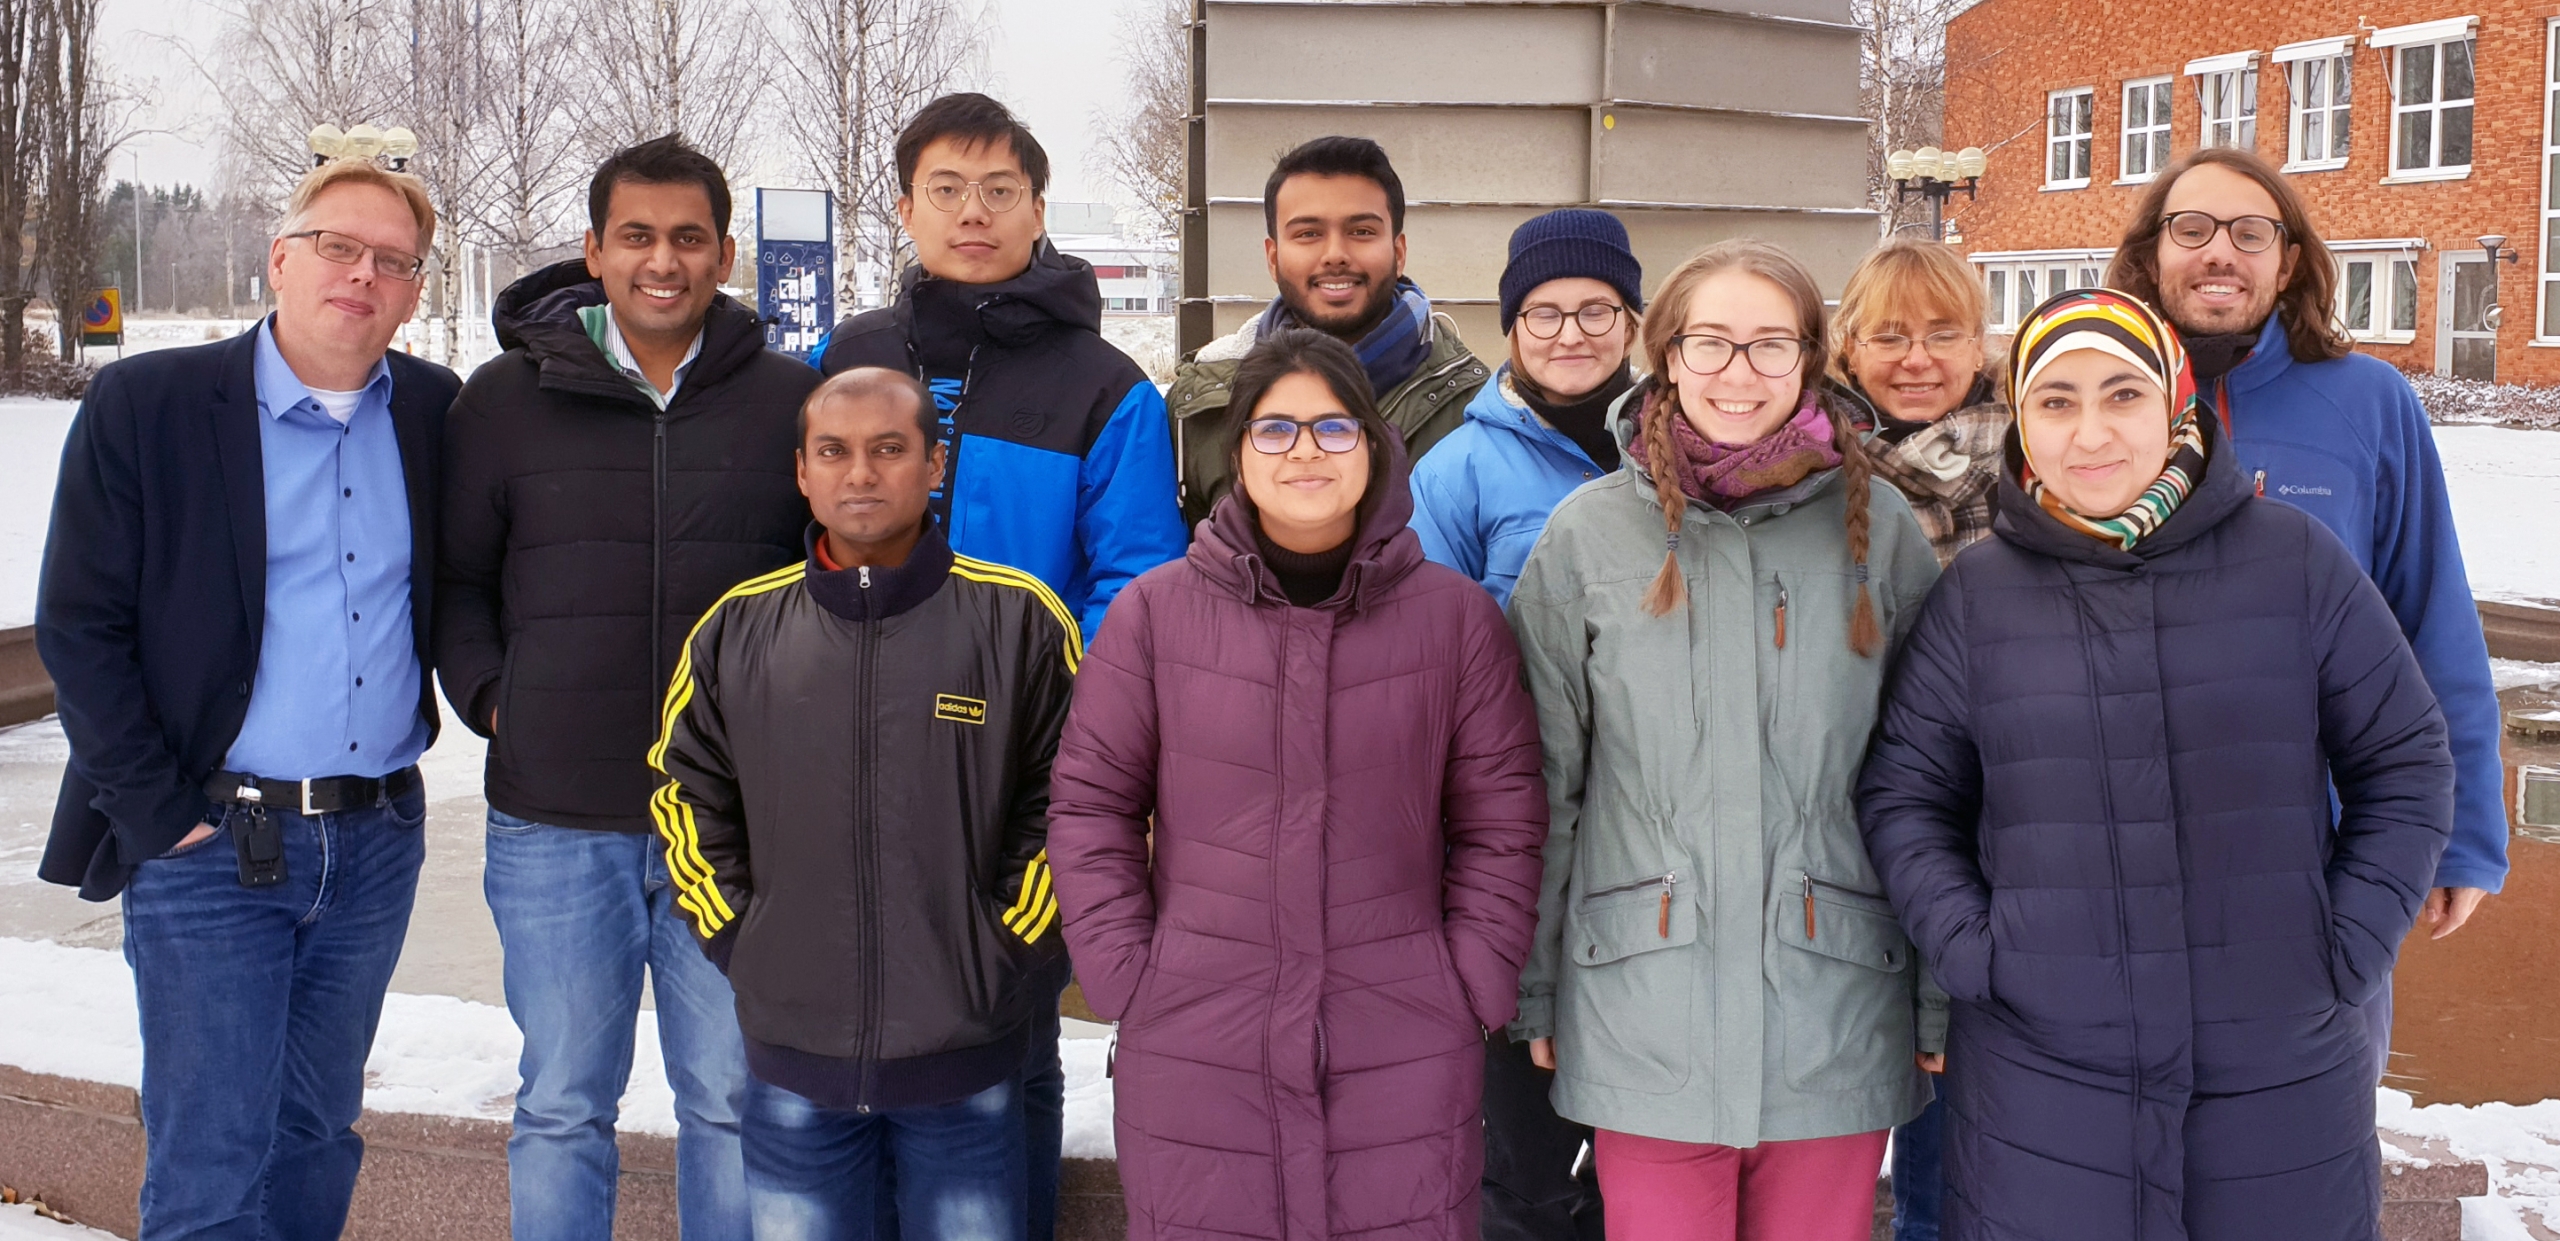 Systems' Perspectives on Biomass Resources, of the Bio4Energy Graduate School on the Innovative Use of Biomass. Class of 2019. Photo by courtesy of Luleå University of Technology.